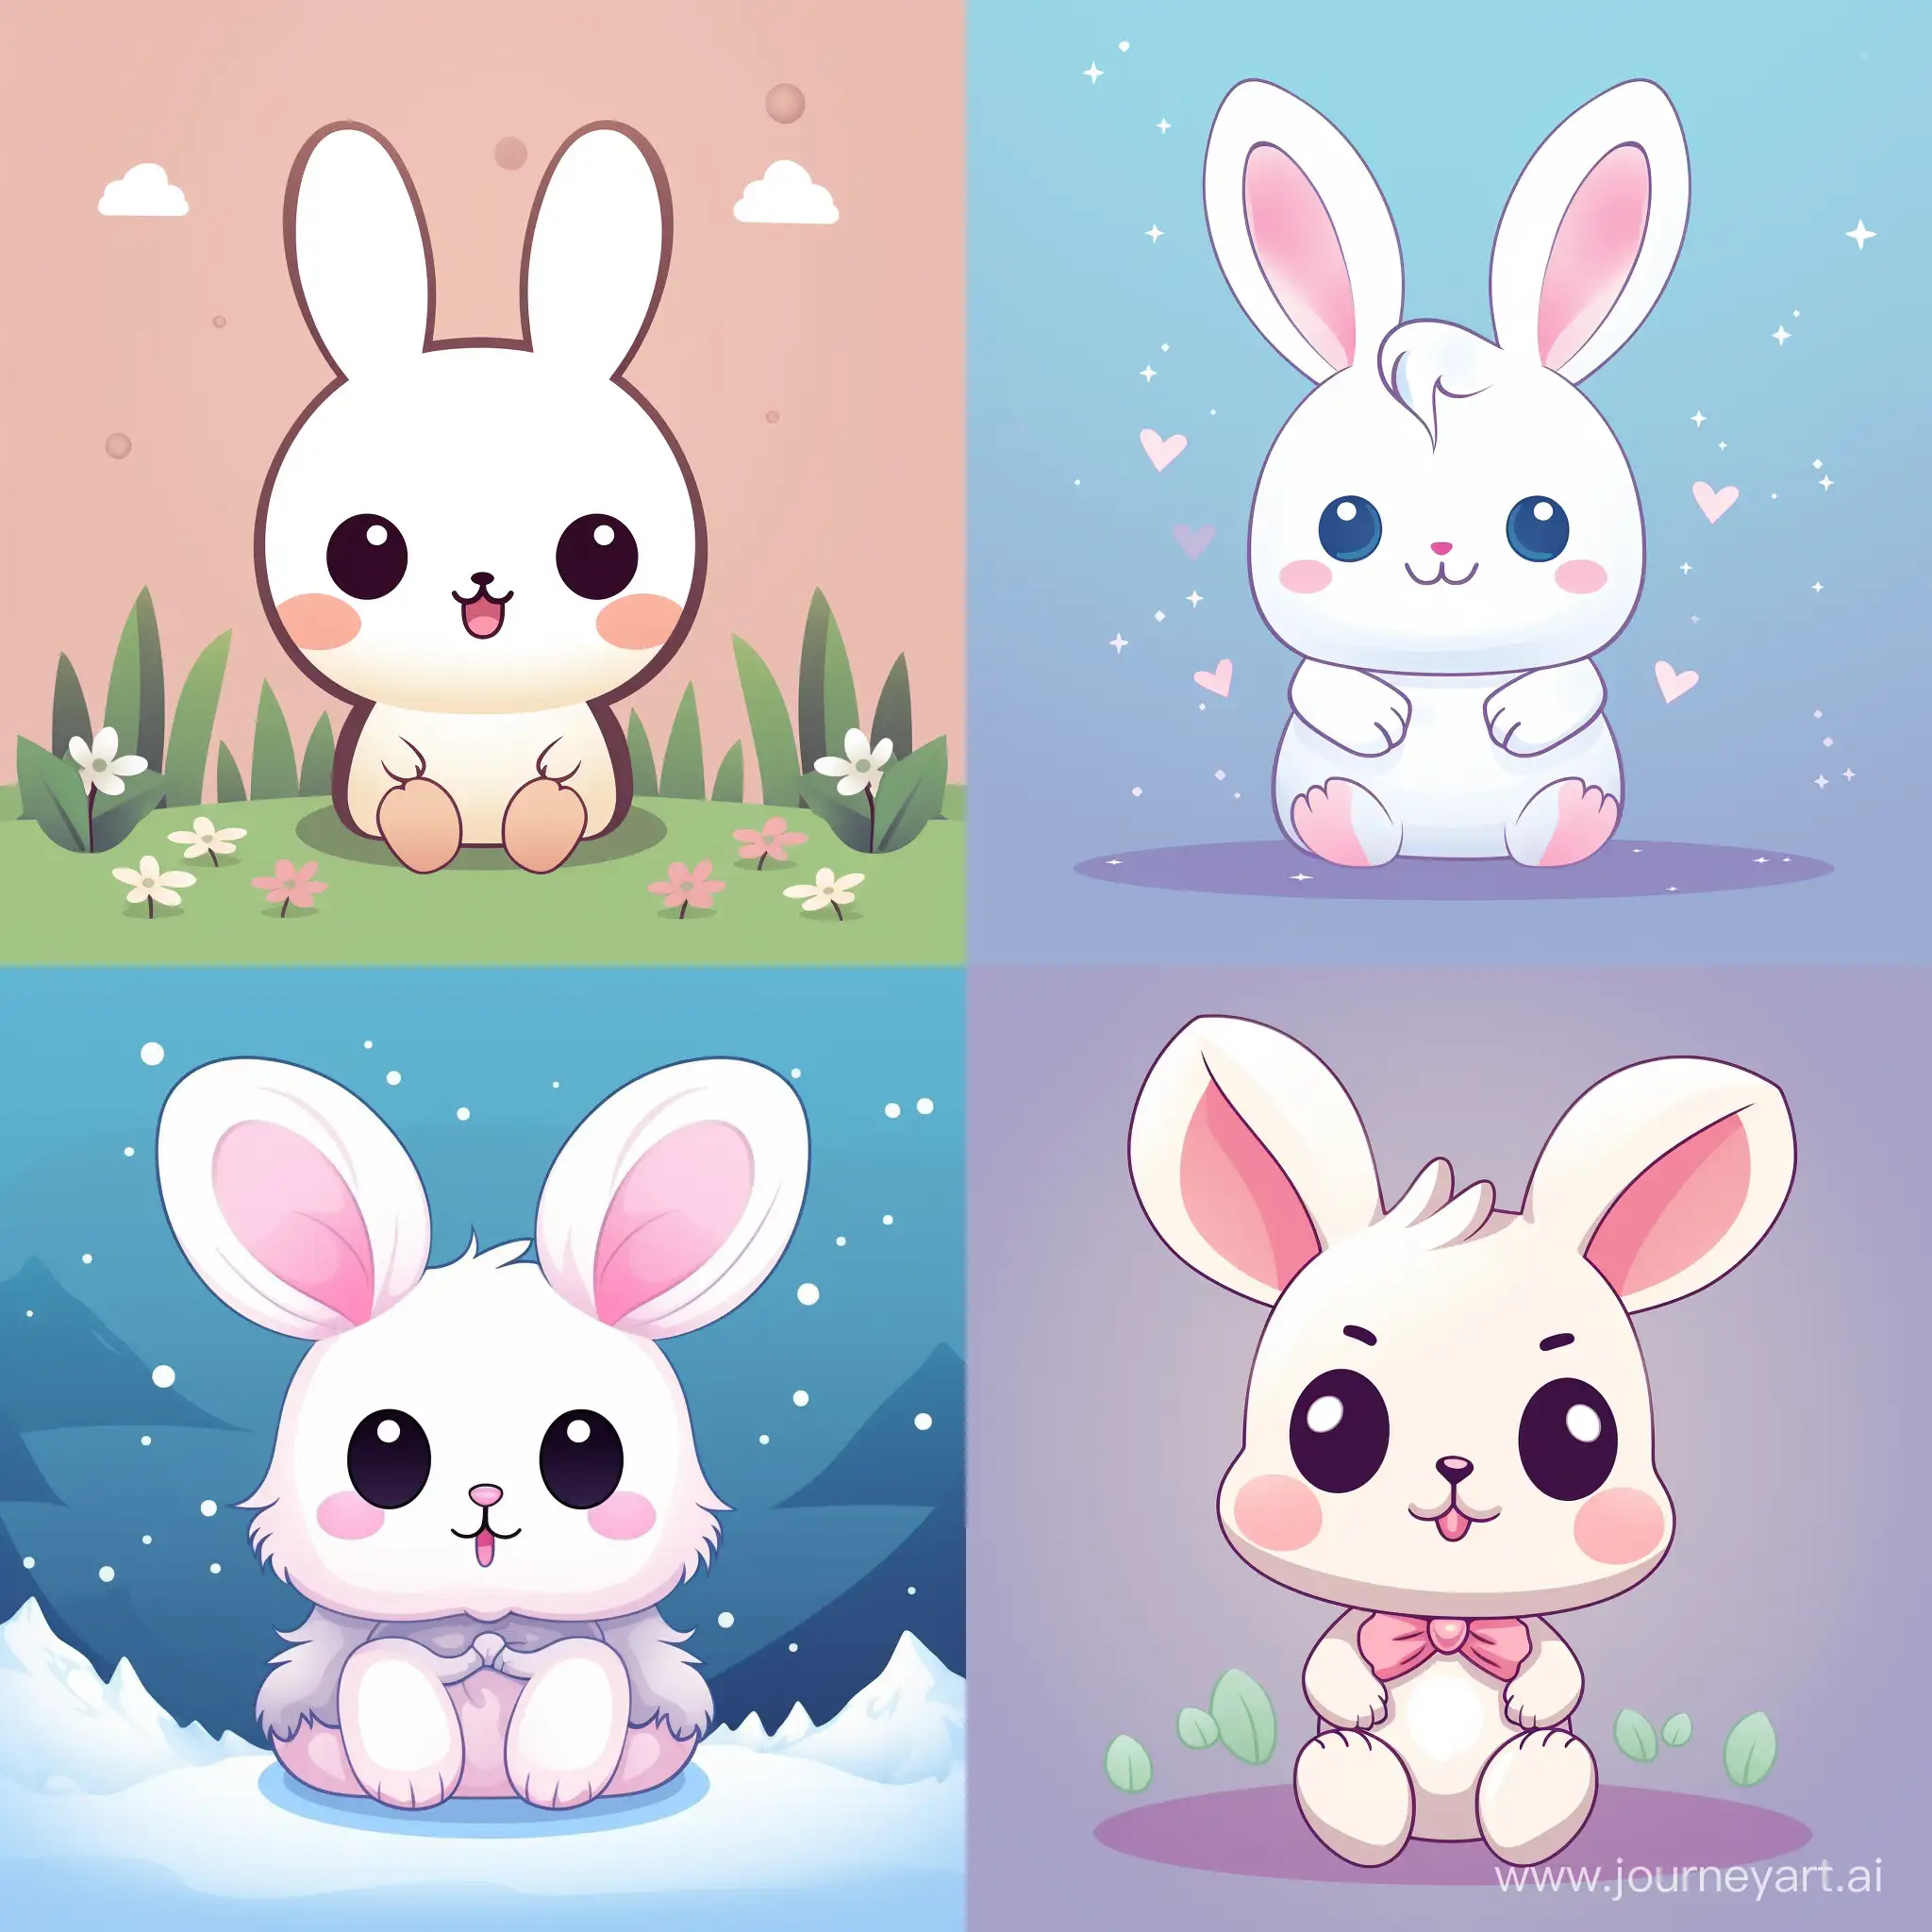 Imagine a charming 2D cartoon kawaii bunny character, central in the composition, with an array of adorable 2D designs around it. The bunny should have large, expressive eyes, a tiny, cheerful mouth, and soft, pastel-colored fur – think shades like baby pink or sky blue. Its ears should be oversized and floppy, adding to its cuteness. Surround the bunny with delightful elements like hearts, stars, and flowers, all in a harmonious pastel palette. Integrate some whimsical motifs such as tiny cupcakes, rainbows, and fluffy clouds, each rendered in a simplistic, cute style. The background should be a soft, muted color to make the character and the cute designs pop. Emphasize bold, clean lines and flat colors to maintain that classic 2D kawaii charm. The overall vibe of the image should be joyful, peaceful, and irresistibly cute, perfect for a children's book illustration or a nursery wall art, in minimalistic vector style